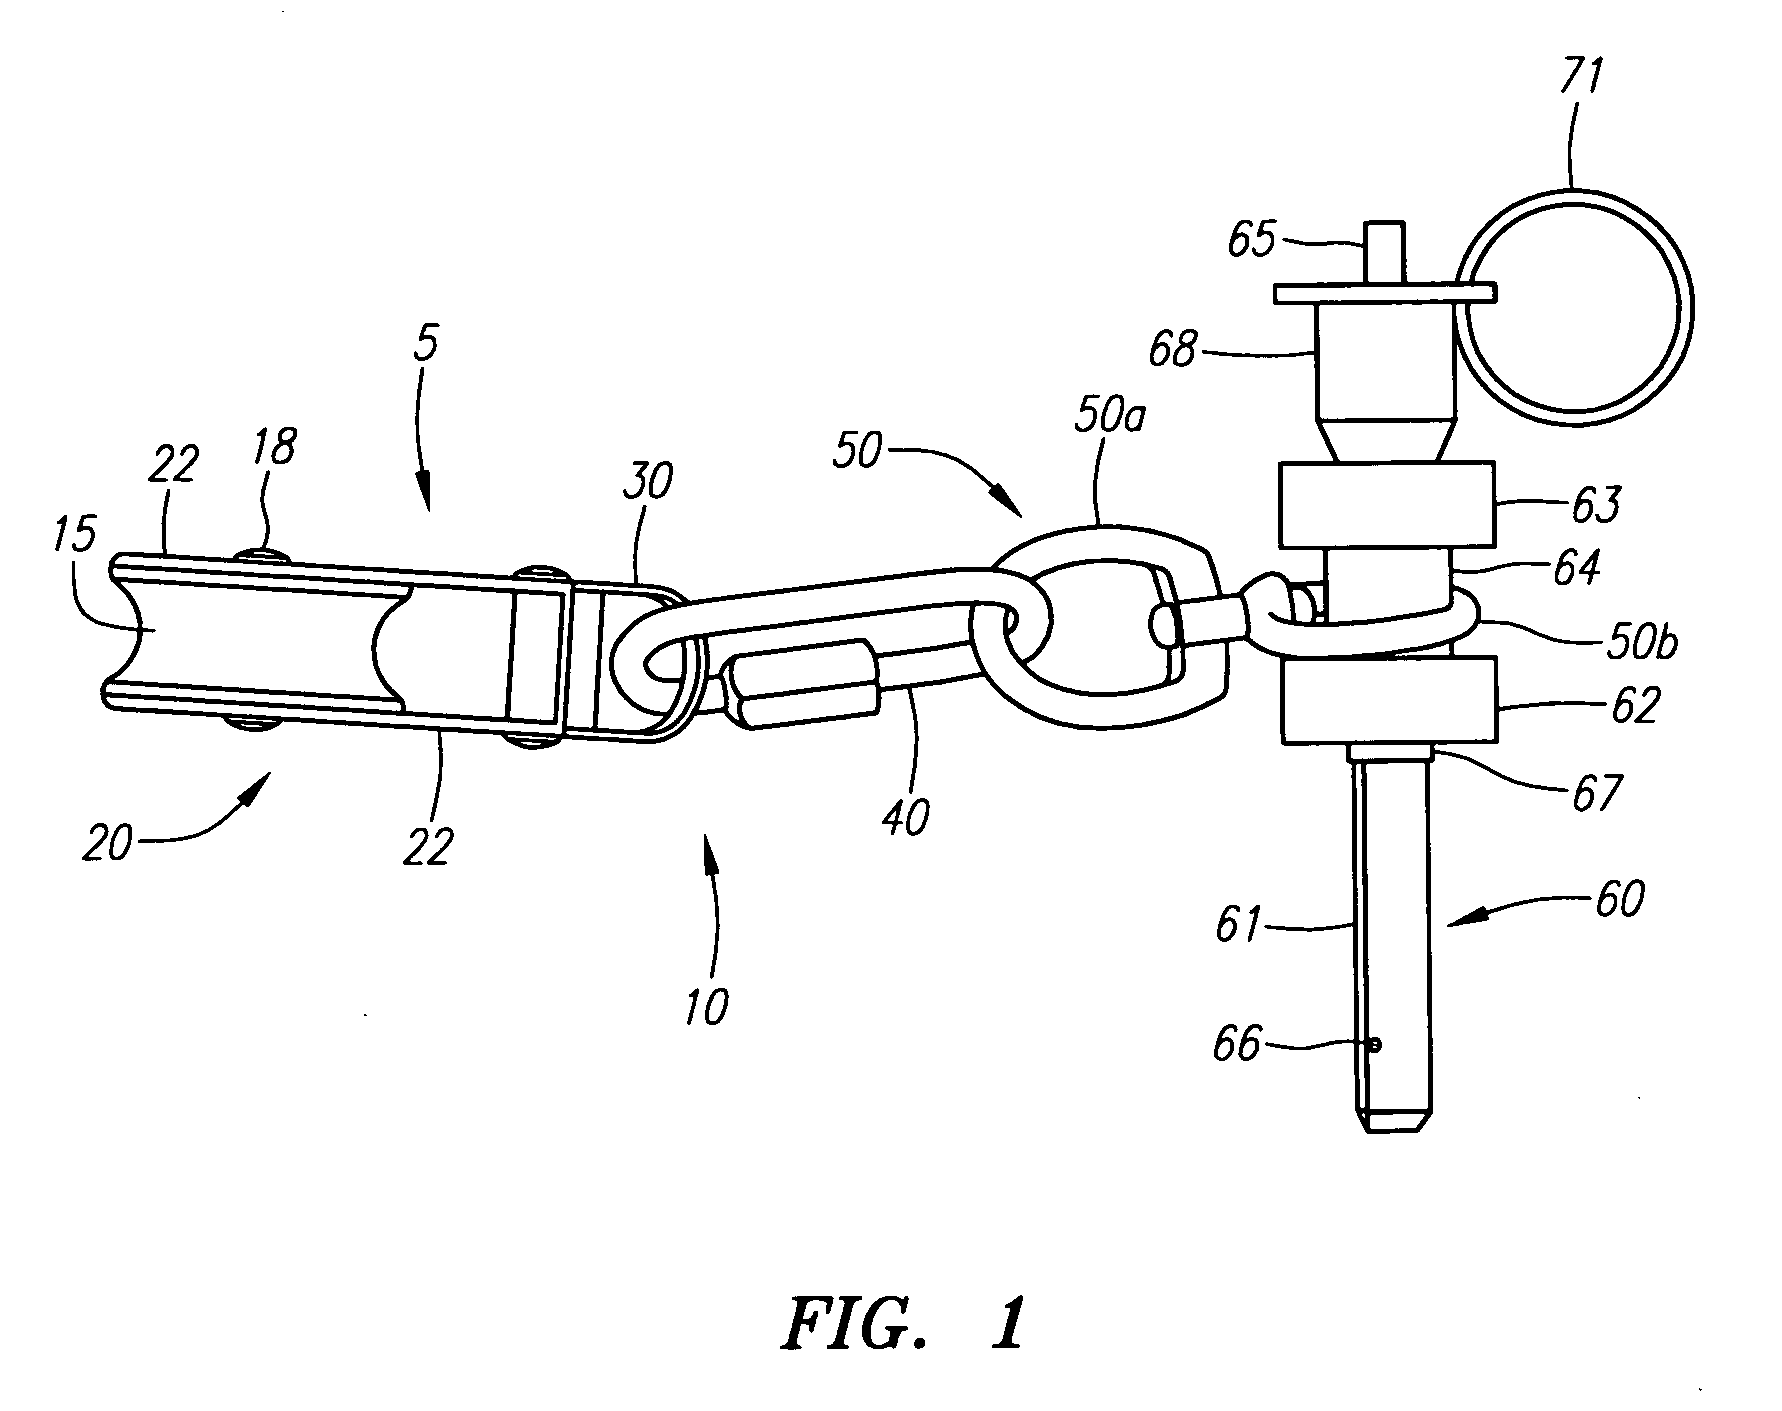 Adjustable mounting device for exercise equipment